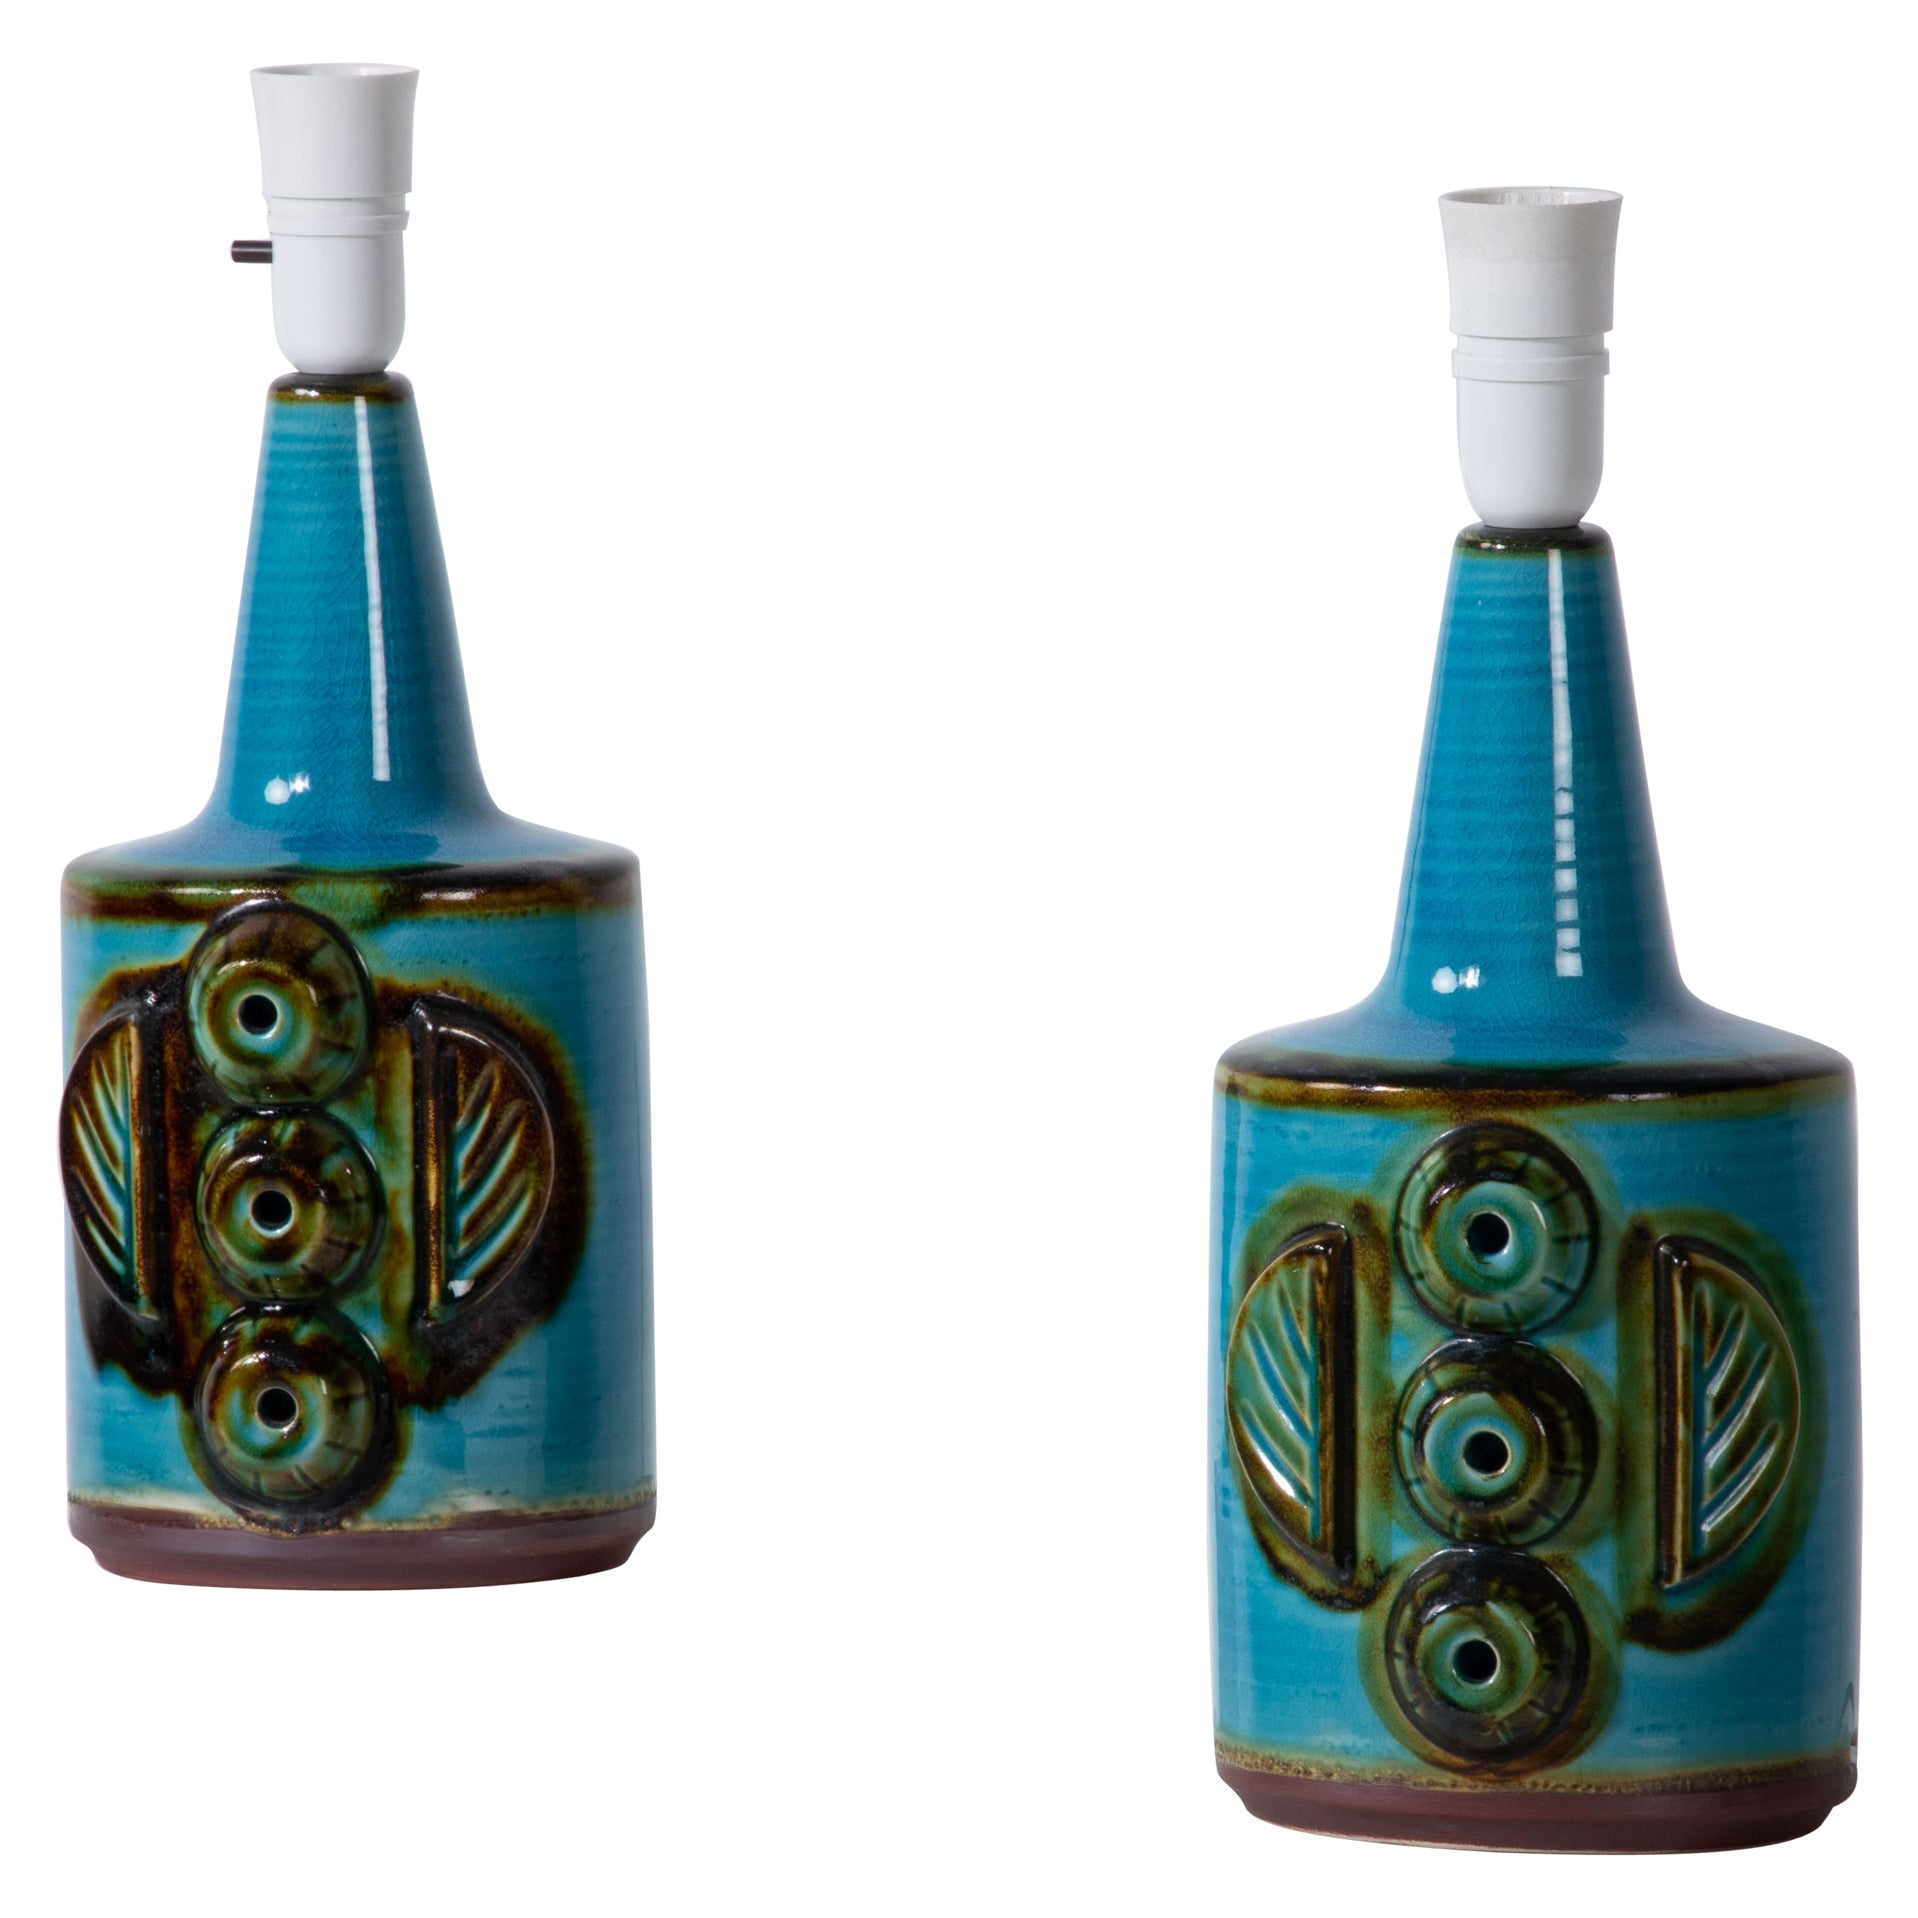 Pair of Turquoise Søholm Table Lamps by Einar Johansen, Denmark, 1960s